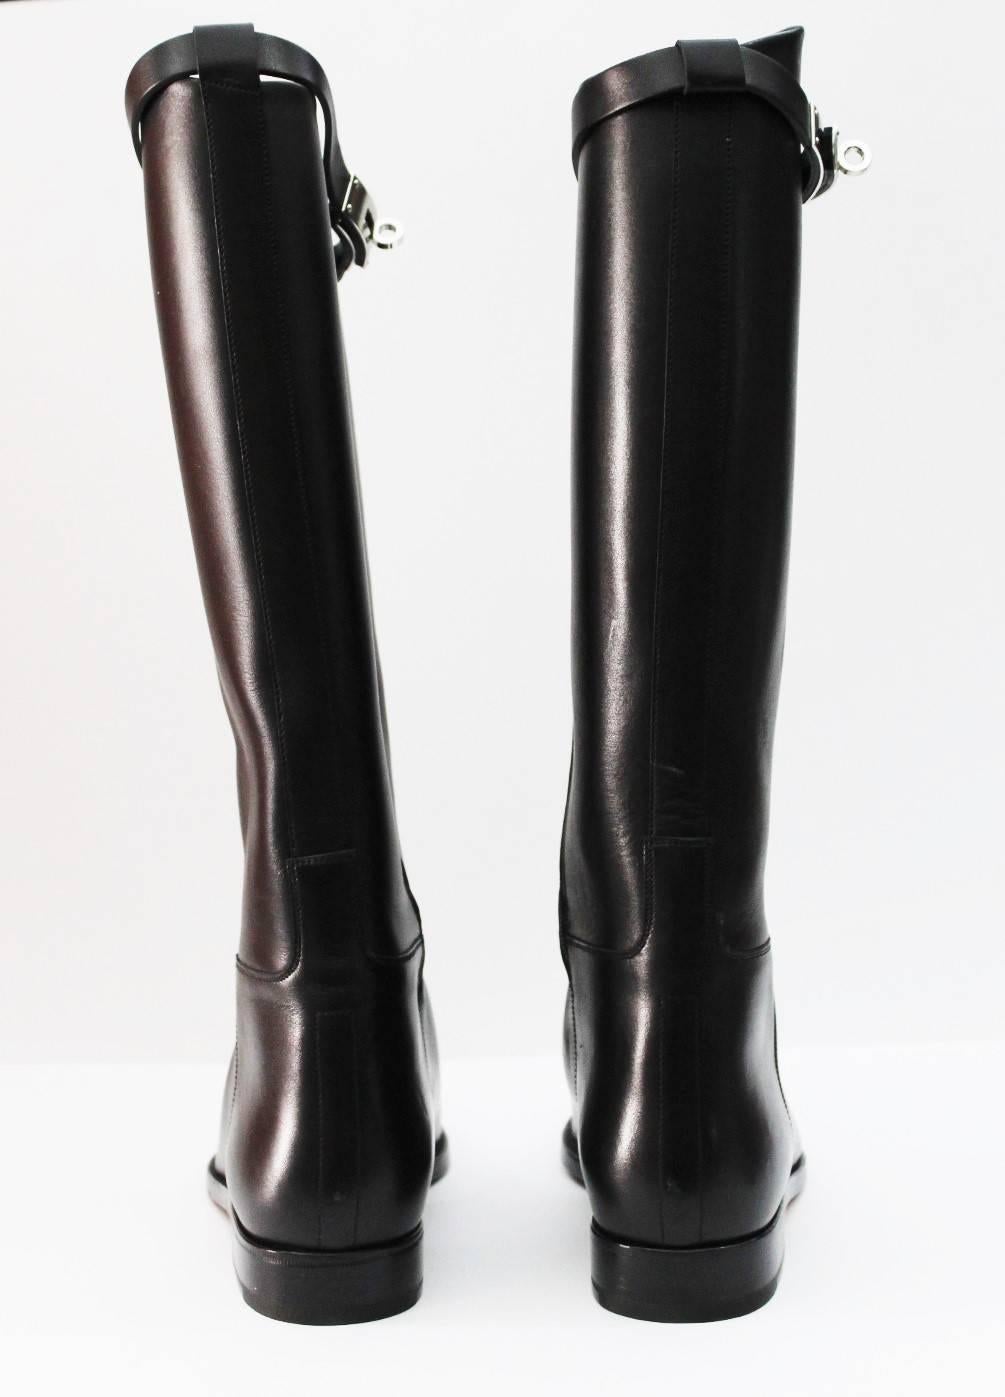 vintage hermes riding boots